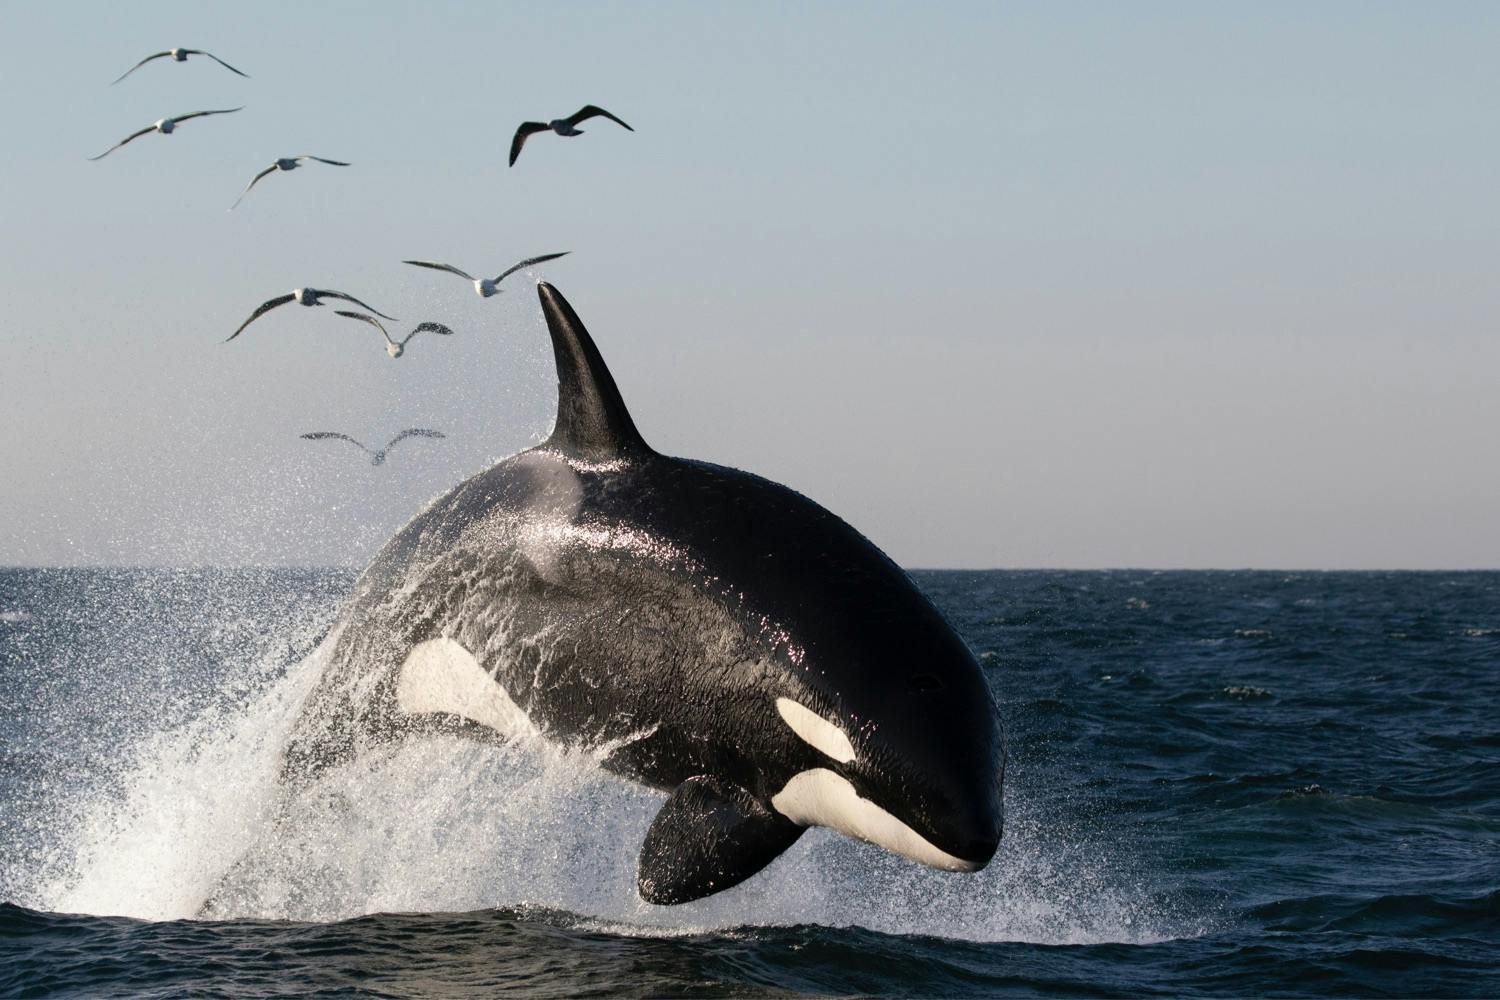 Louise the Orca photographed by Jodi Frediani